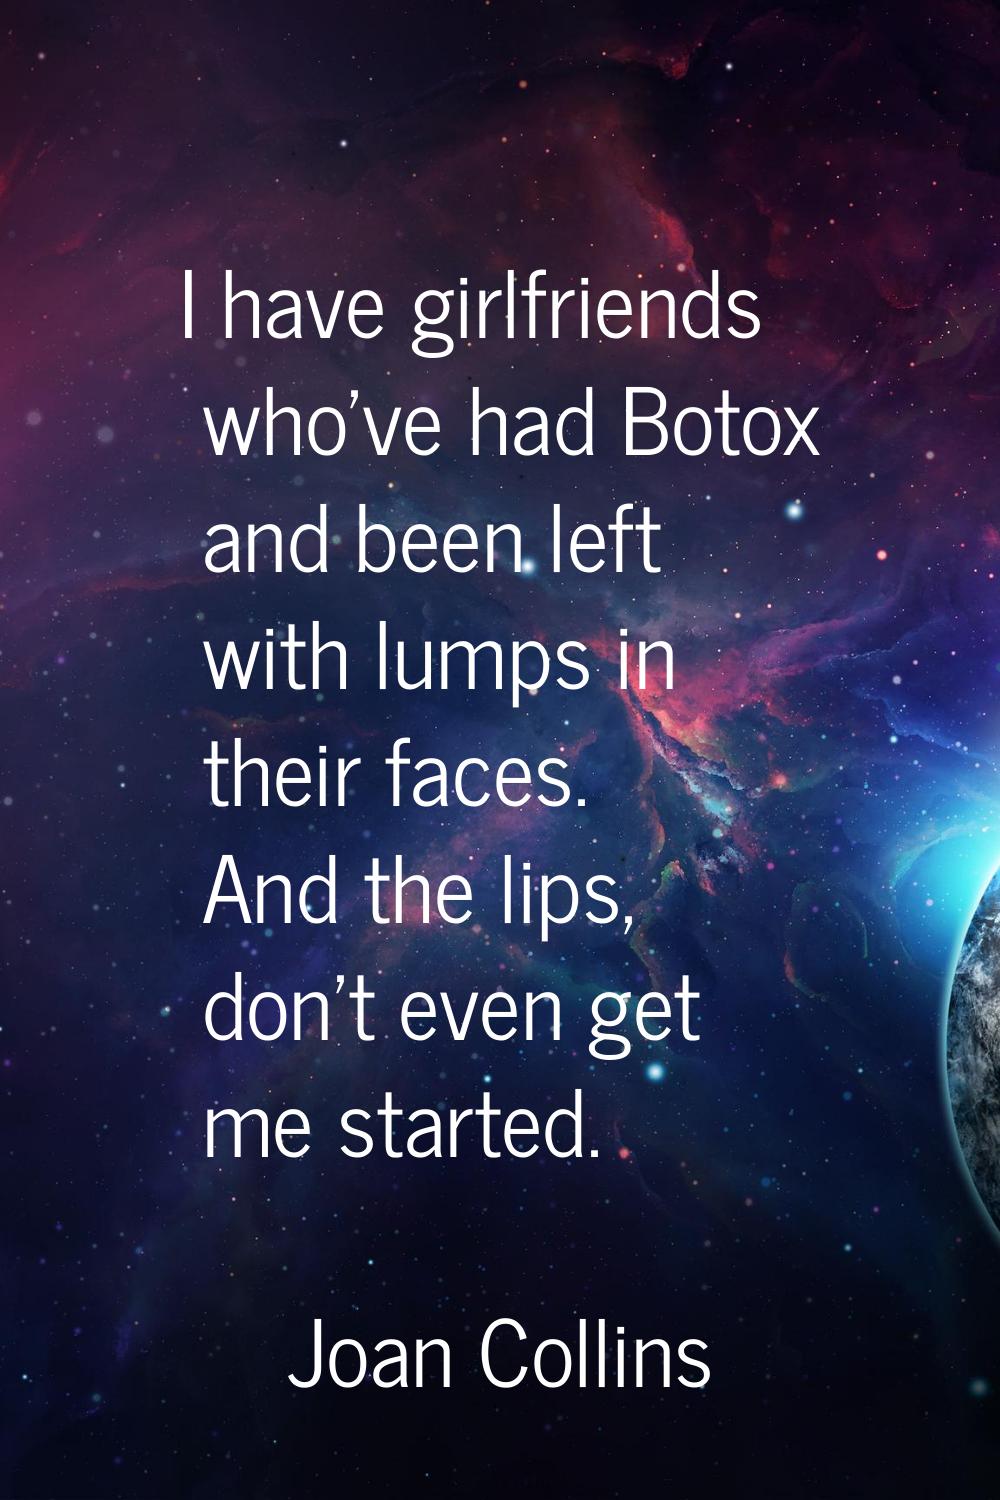 I have girlfriends who've had Botox and been left with lumps in their faces. And the lips, don't ev